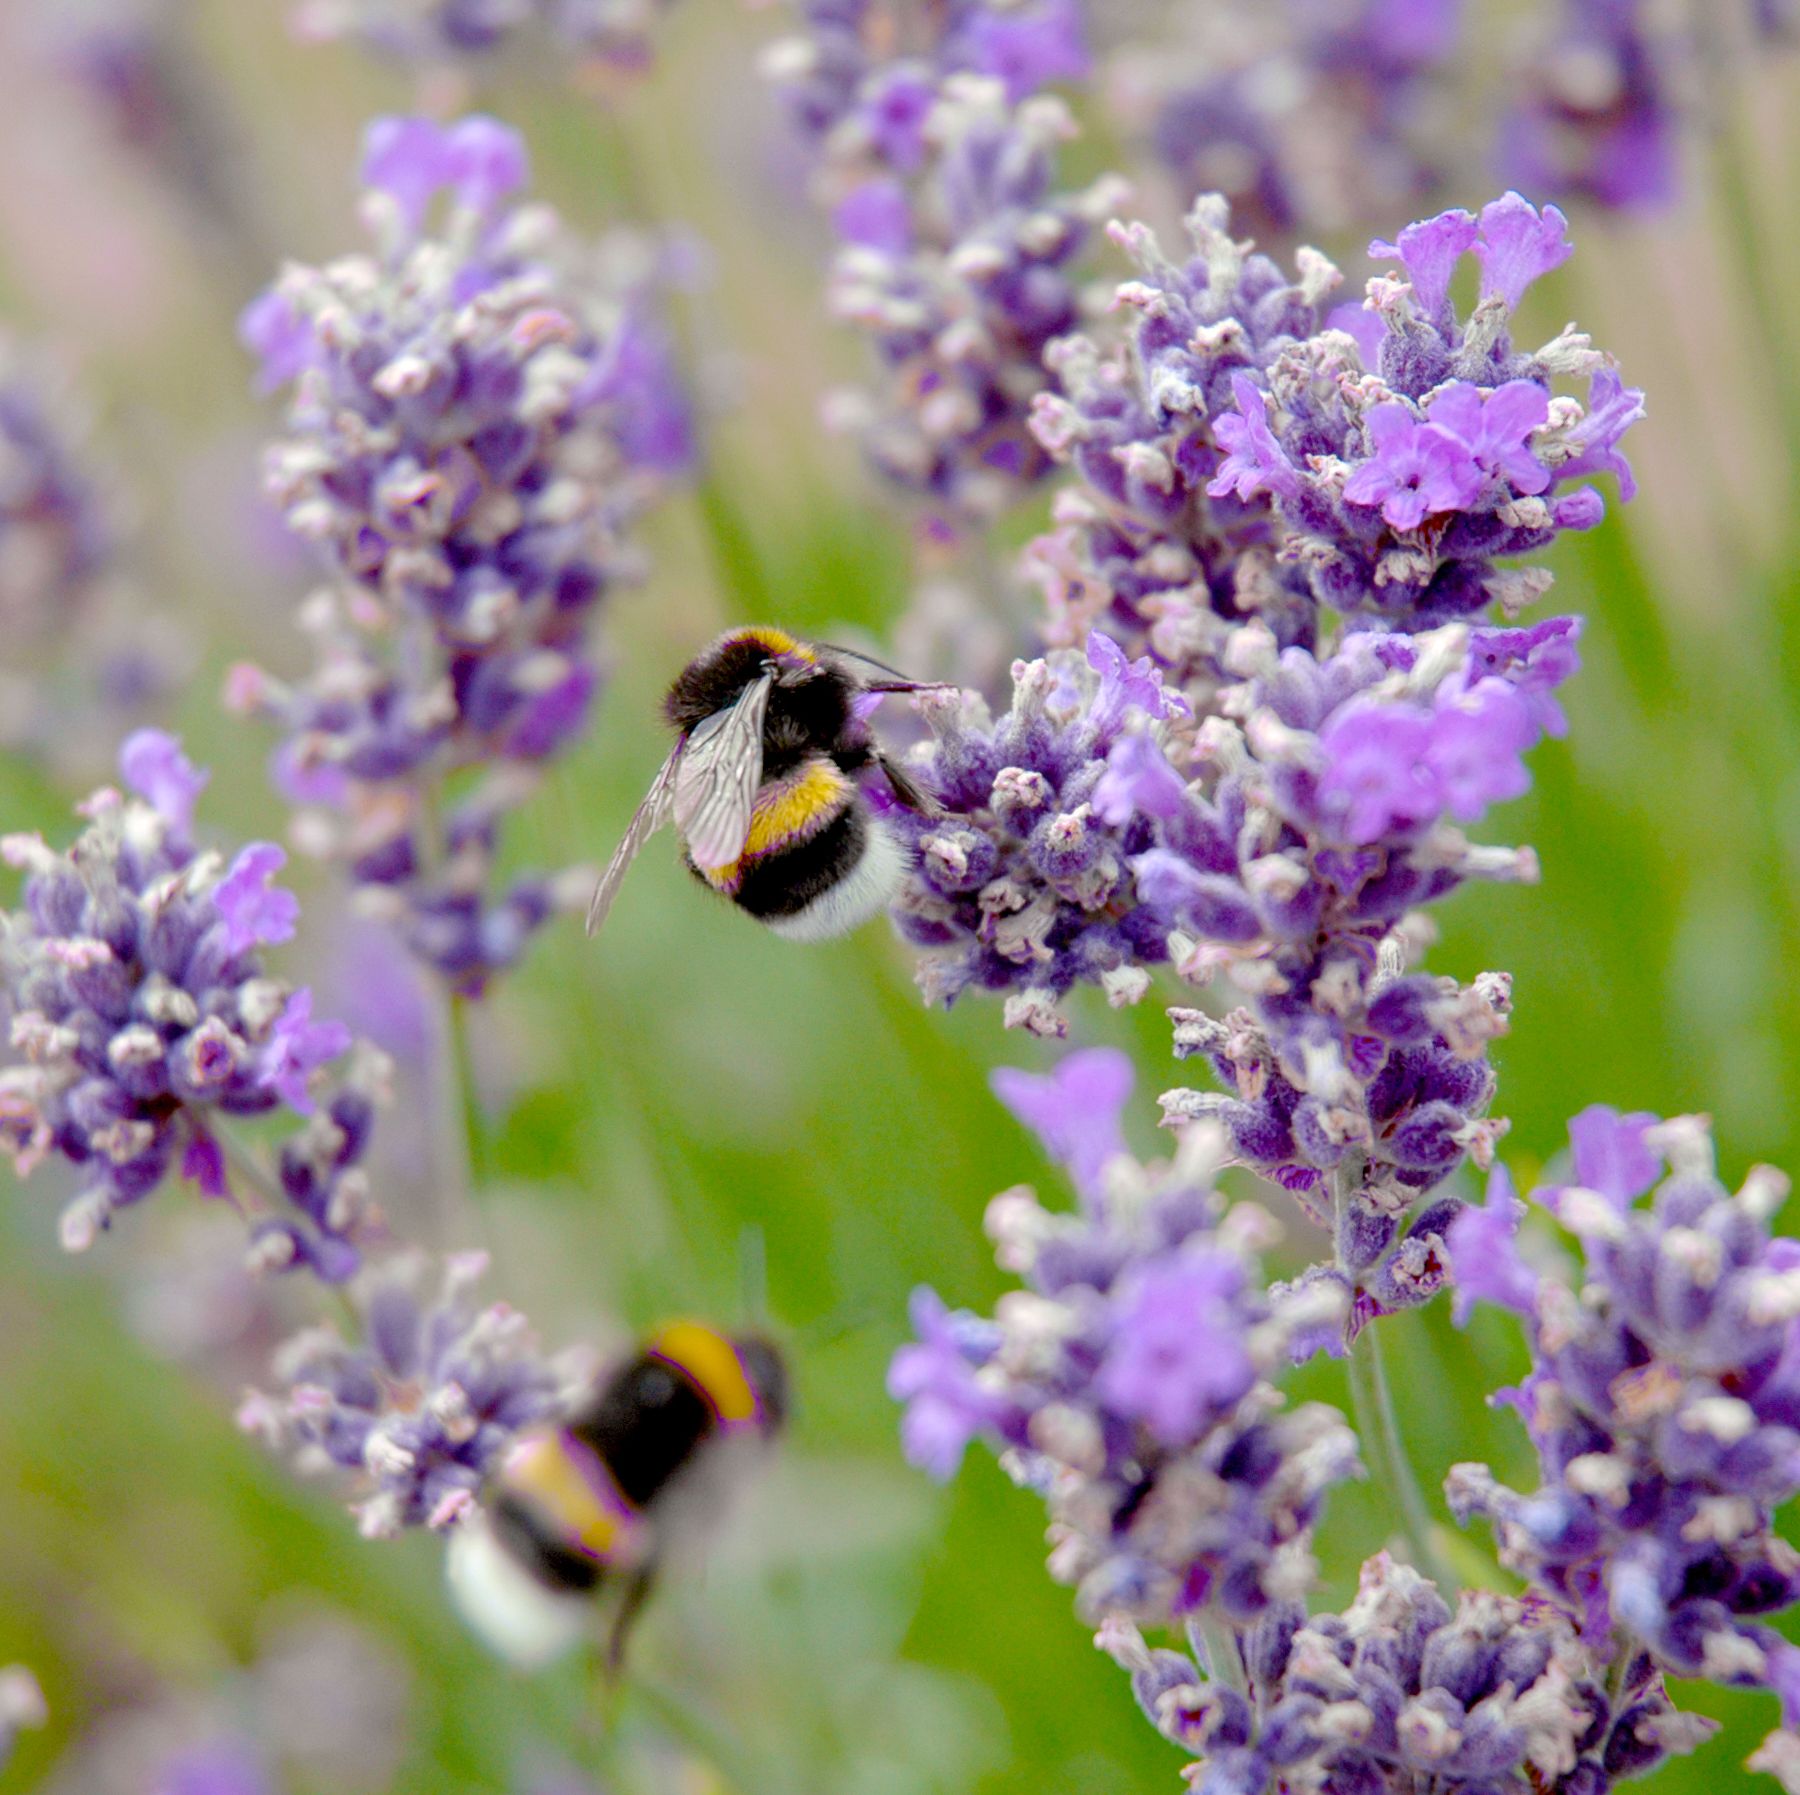 bees on a lavender bush in the garden